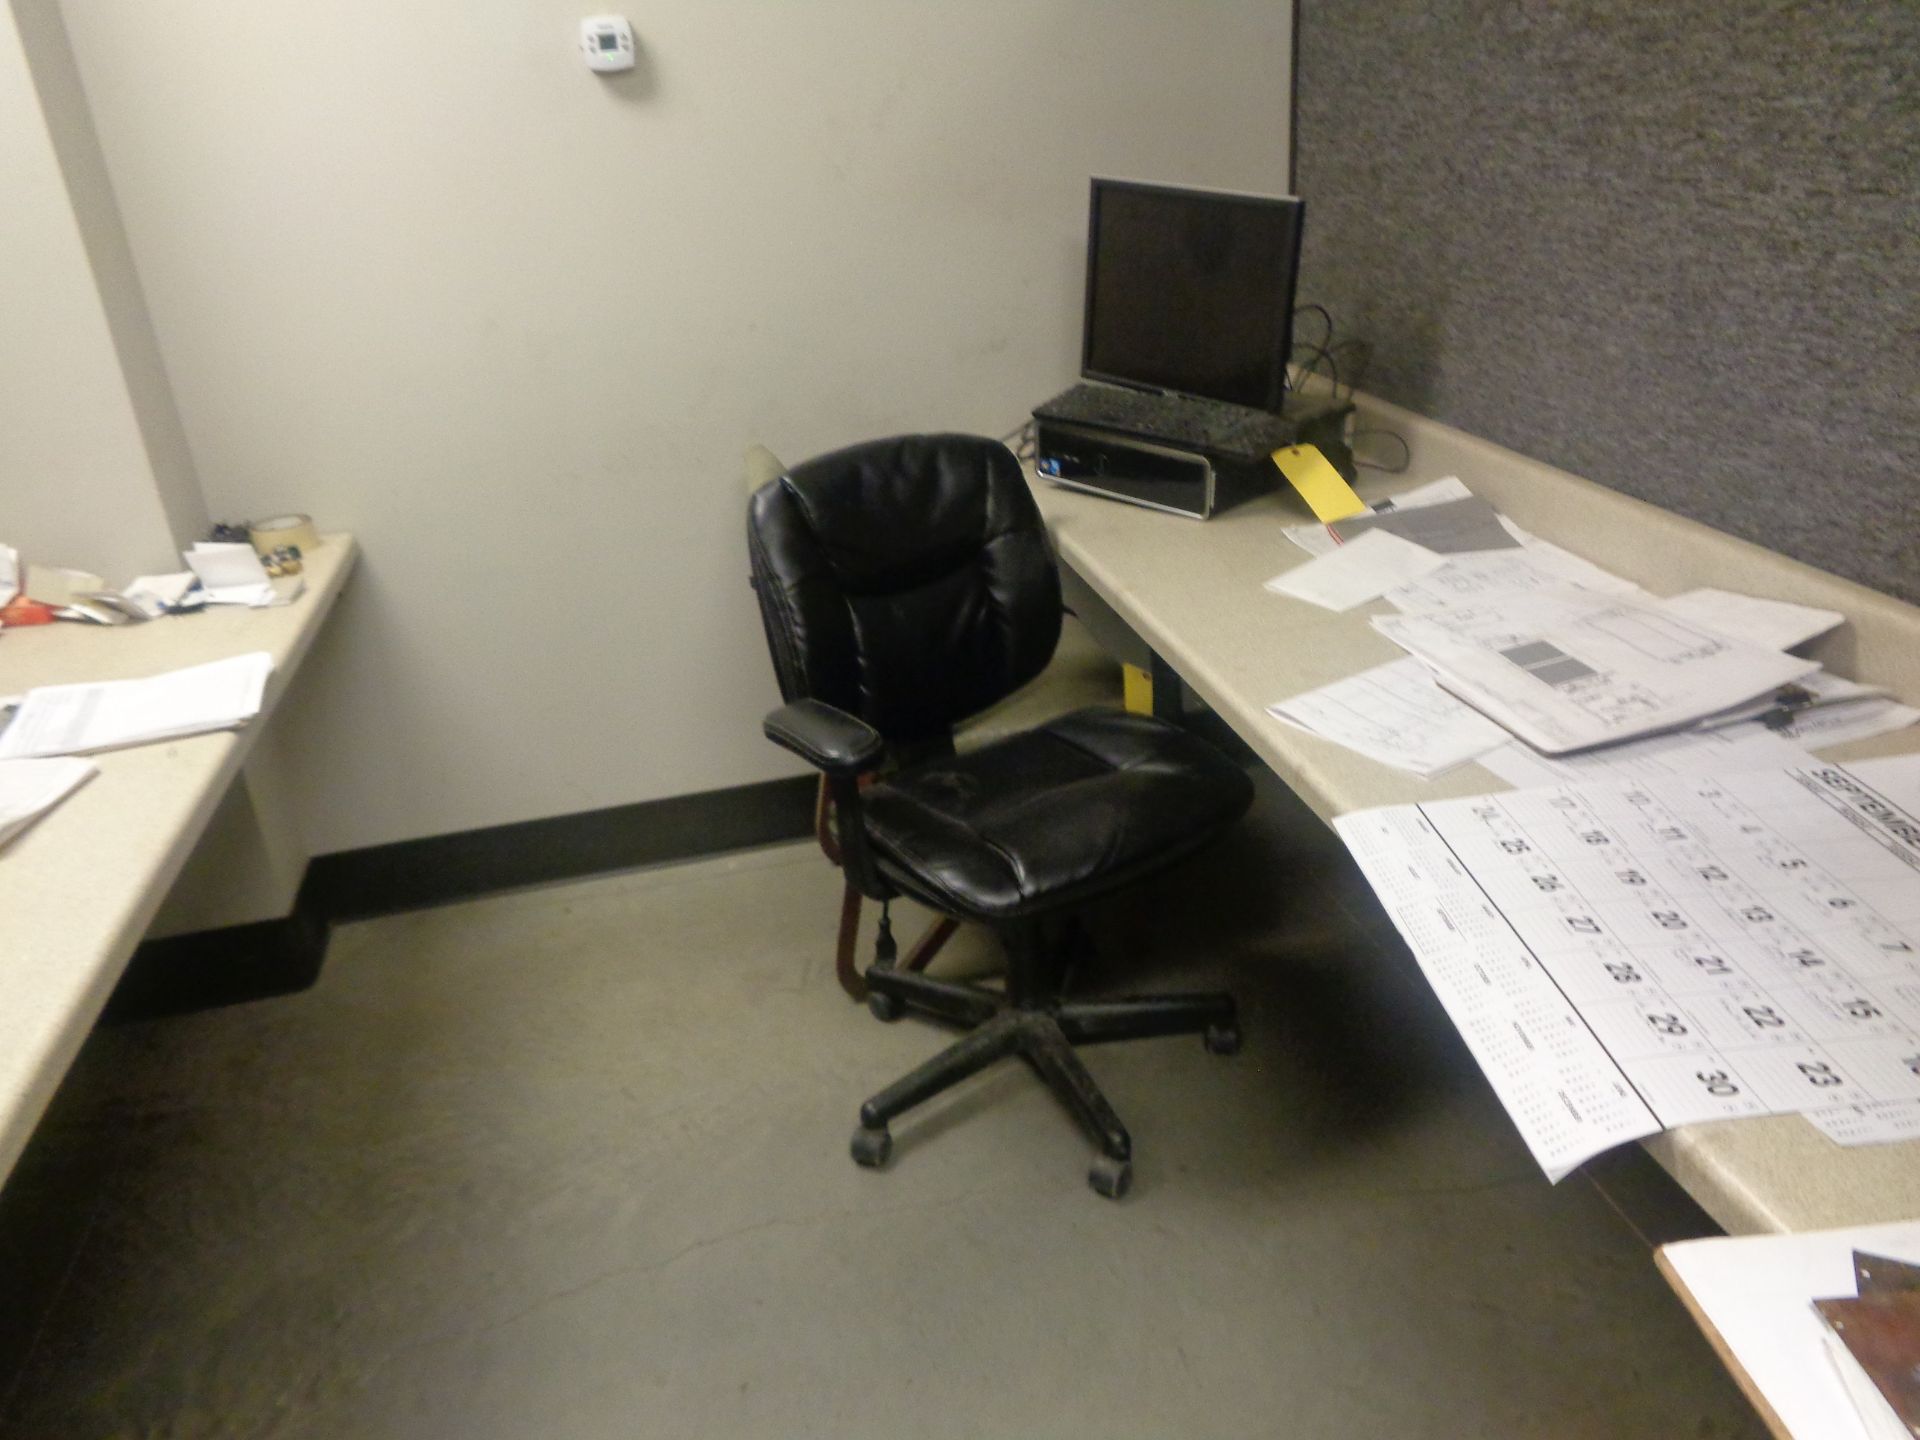 CONTENTS OF OFFICE CUBE; FILE CABINETS, DESK, AND CHAIR - Image 3 of 3